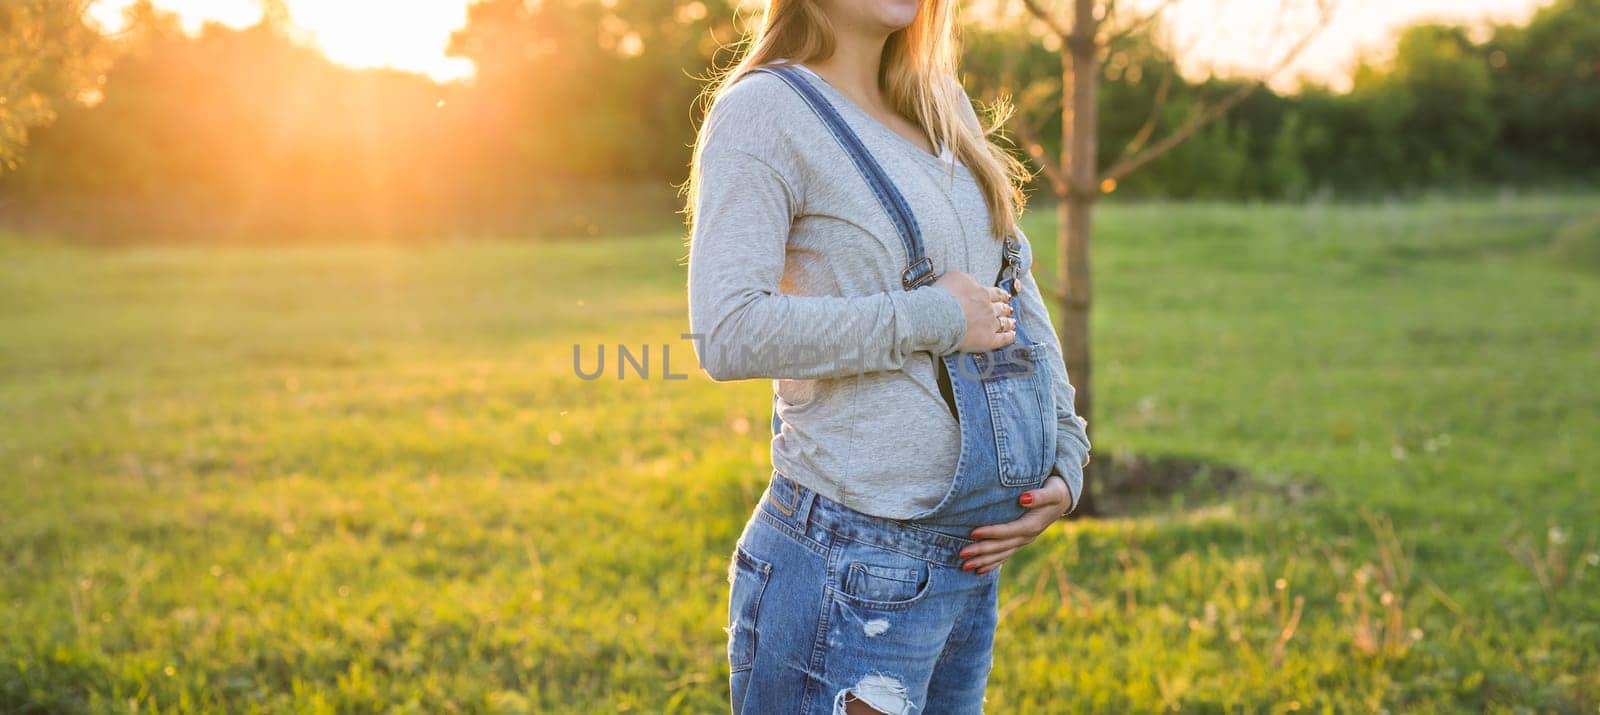 young happy pregnant woman relaxing and enjoying life in autumn nature.